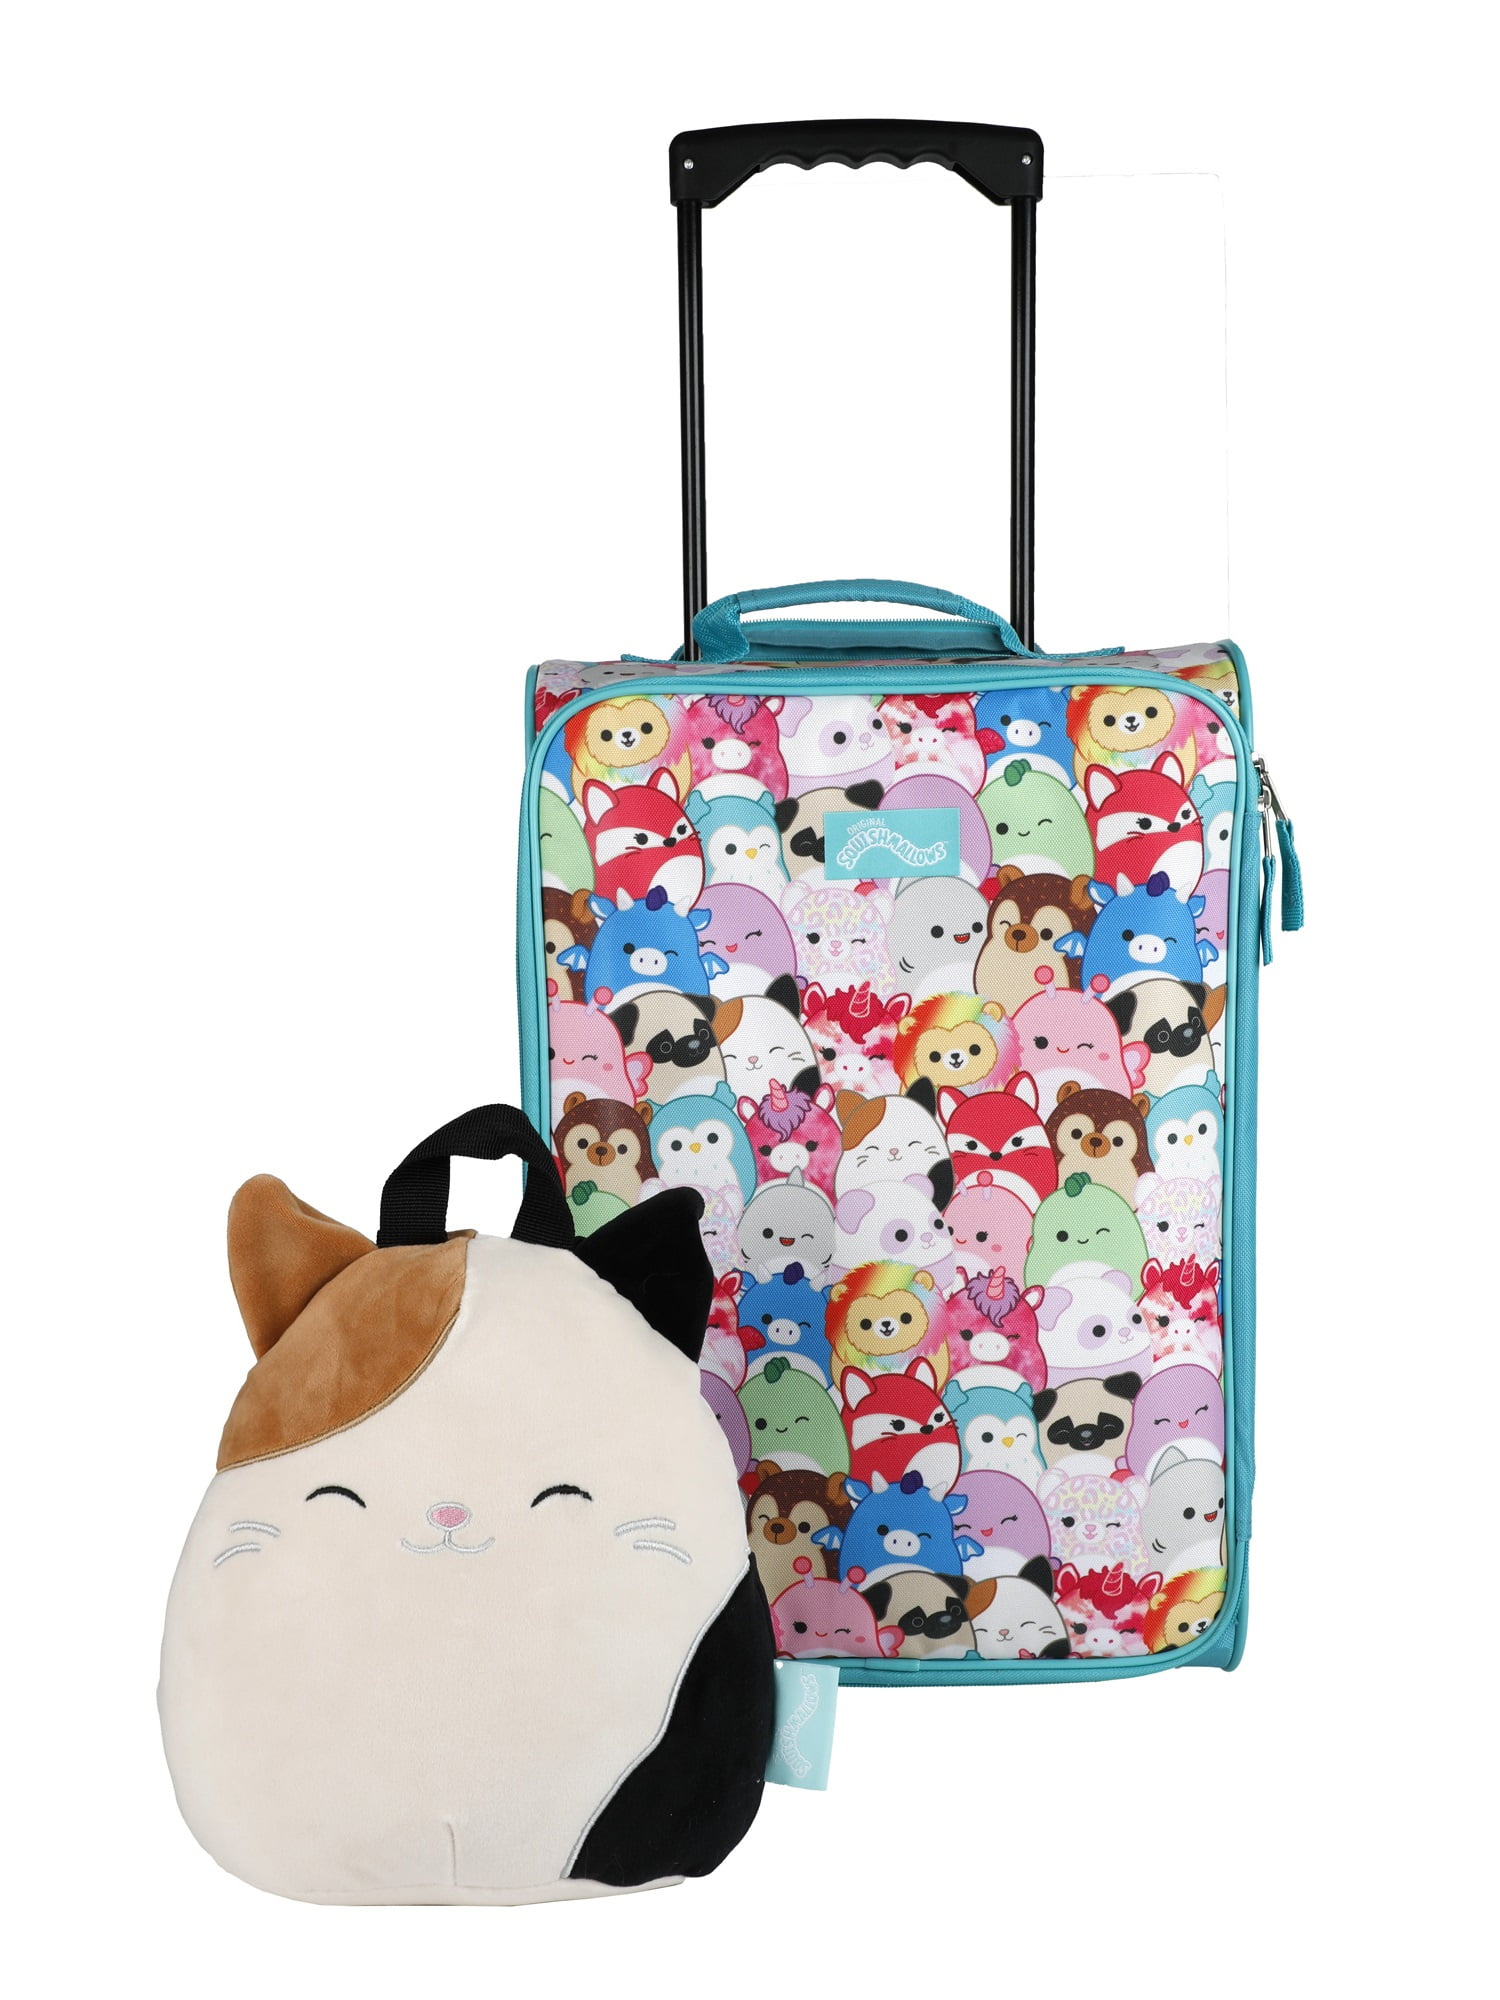 Squishmallows Cameron Cat 2pc  Travel Set with 18" Luggage and 10" Plush Backpack